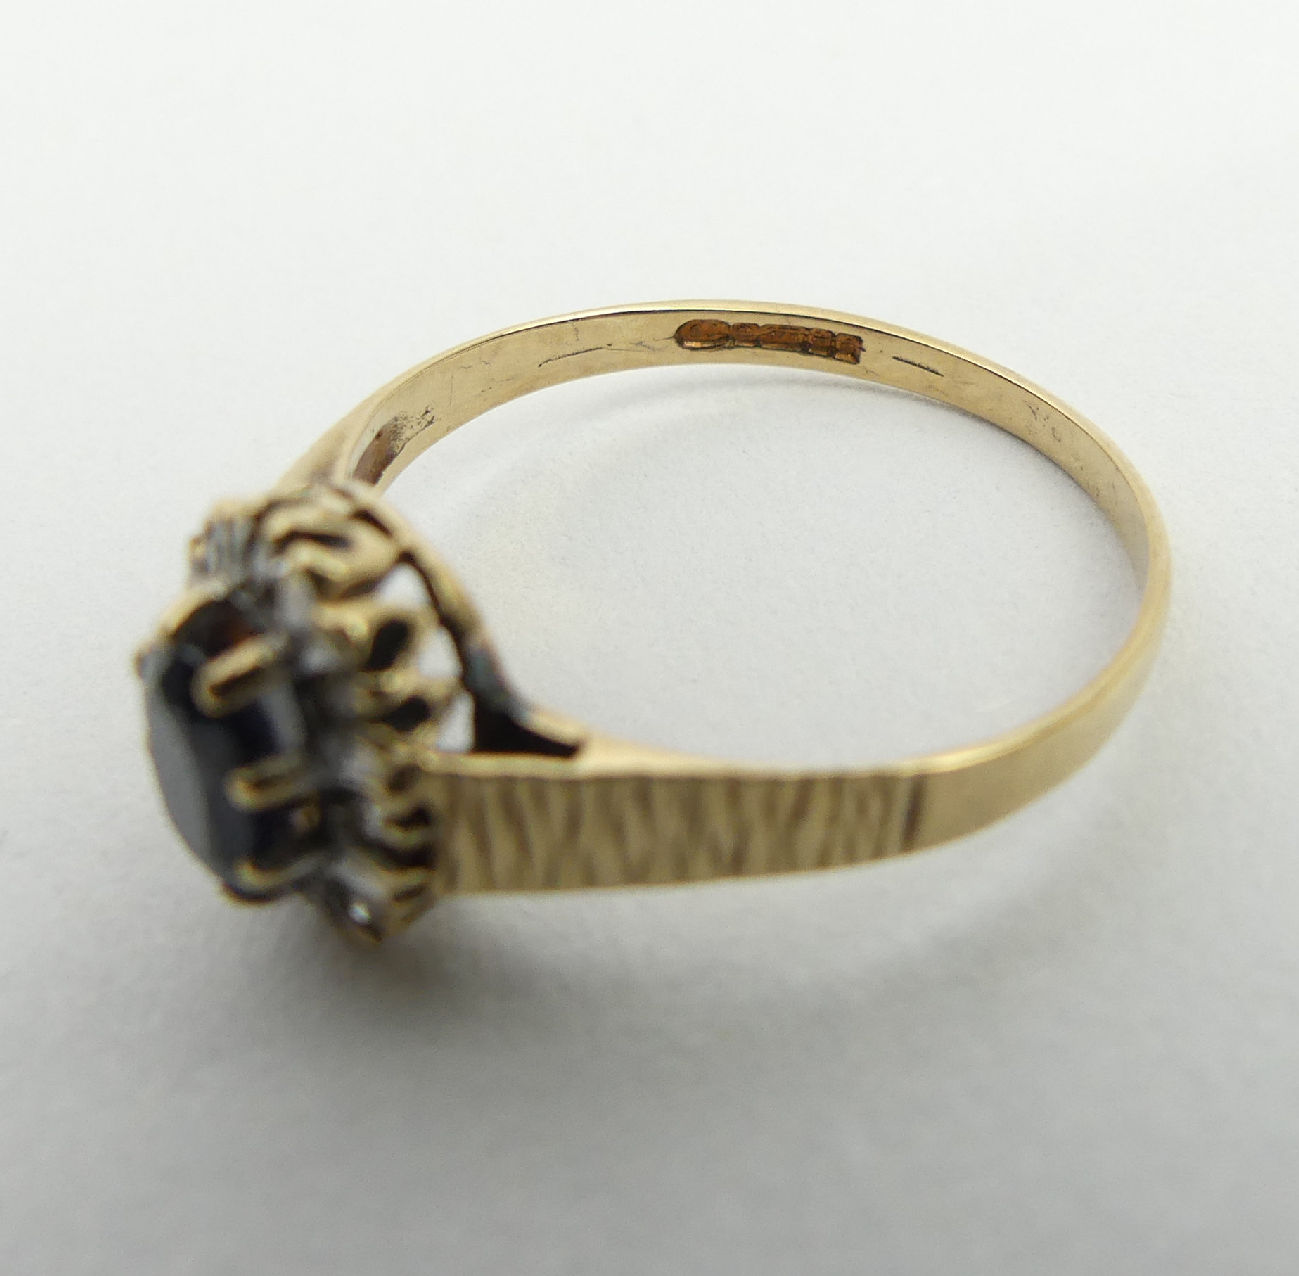 9ct gold sapphire and diamond ring, Birm. 1985, 1.8 grams, 10.2mm, size P1/2. UK postage £12. - Image 6 of 6